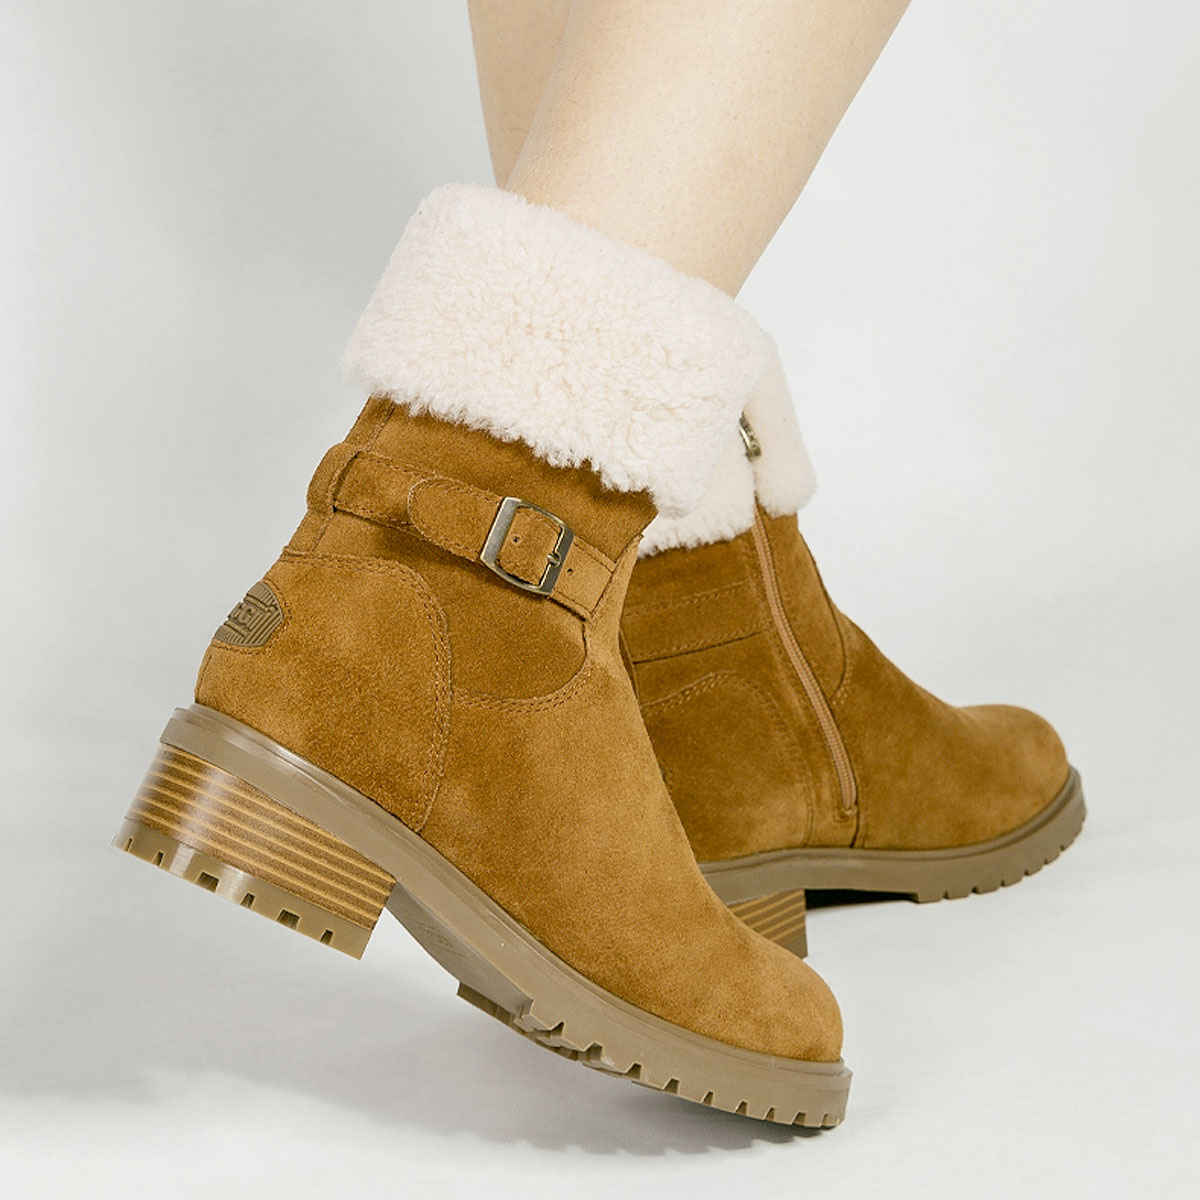 UGG boots come in various styles that are also fashionable